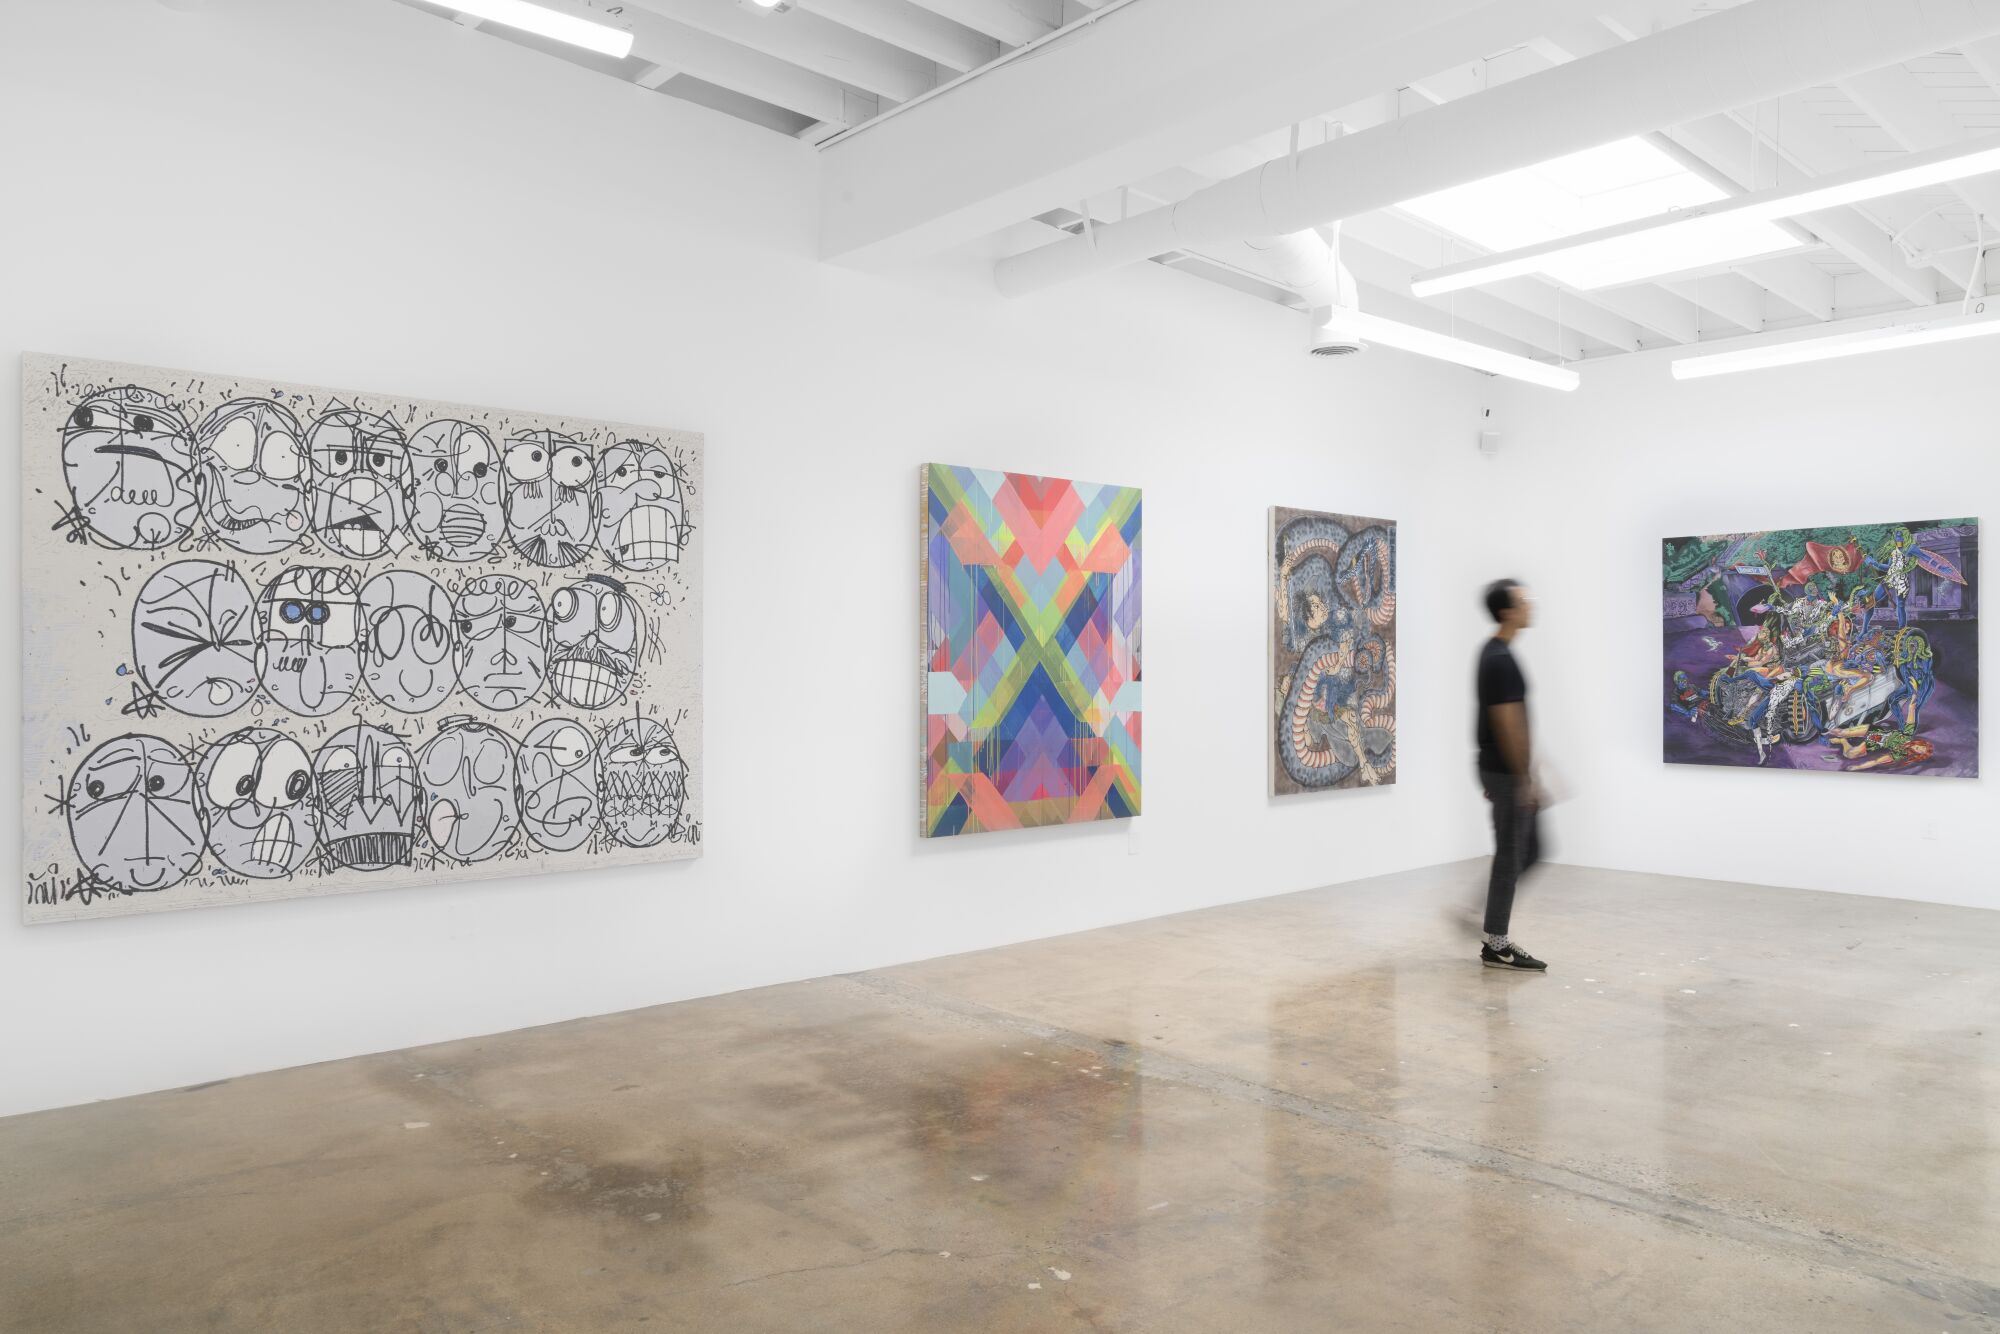 A blurred figure walks past four works of art hanging on the white walls of an open gallery.